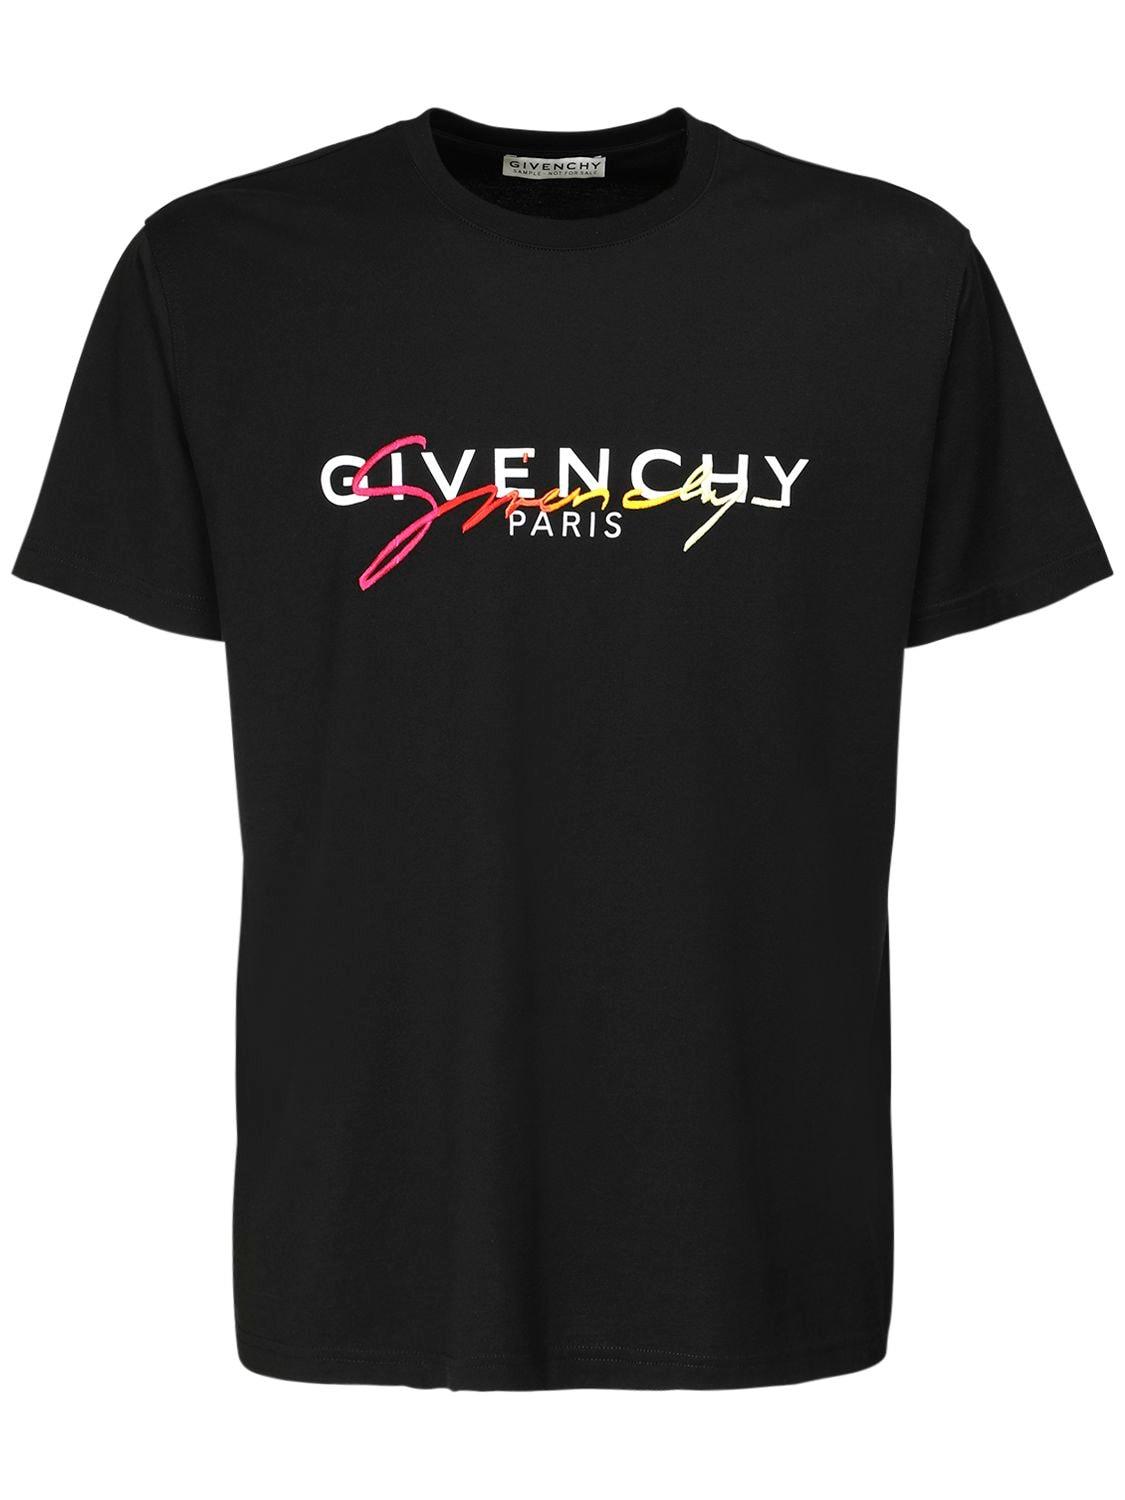 Givenchy Logo Signature Cotton Jersey T-shirt in Black for Men - Lyst